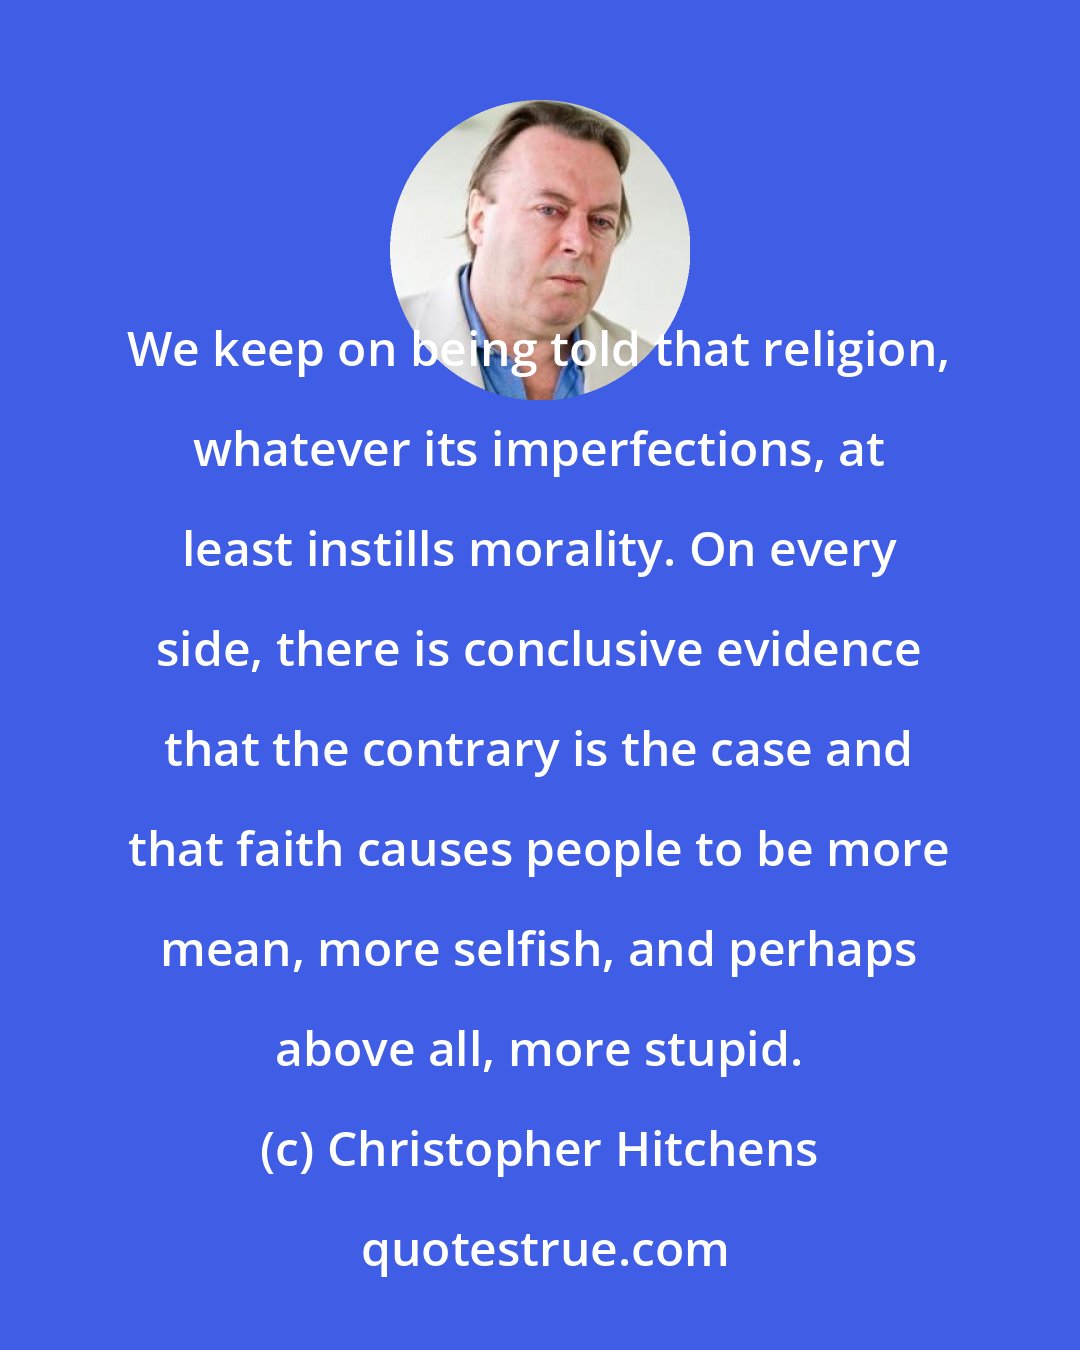 Christopher Hitchens: We keep on being told that religion, whatever its imperfections, at least instills morality. On every side, there is conclusive evidence that the contrary is the case and that faith causes people to be more mean, more selfish, and perhaps above all, more stupid.